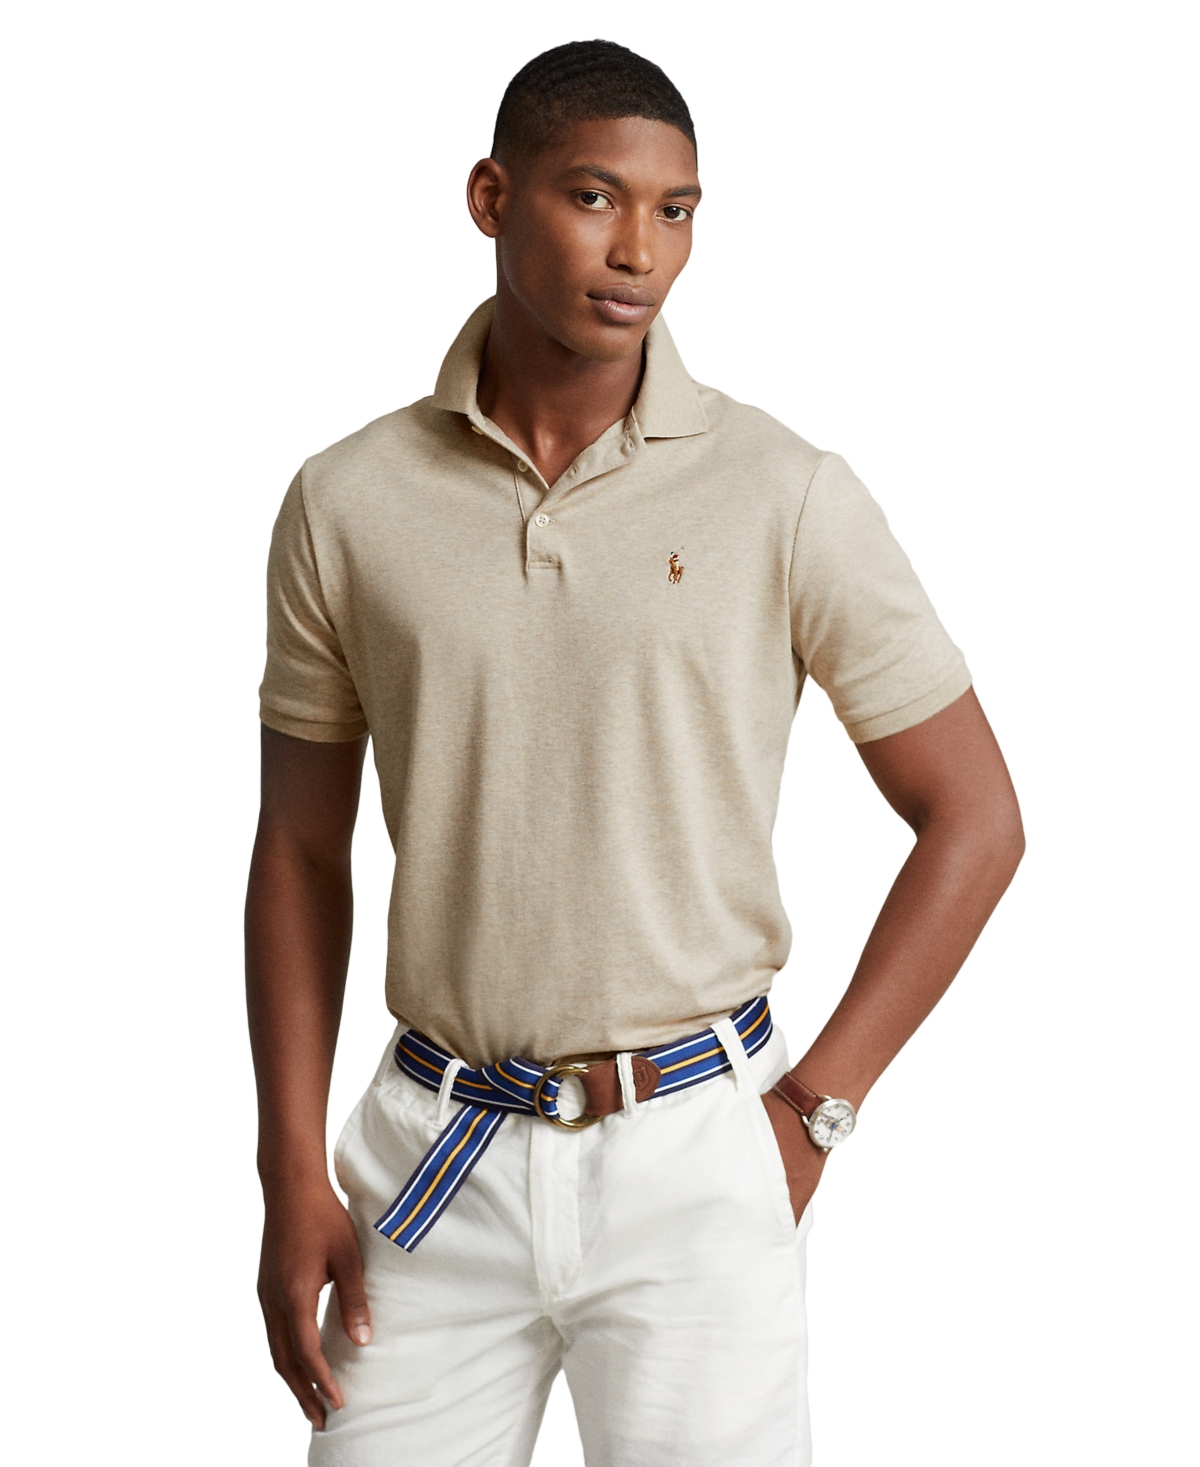 Polo Ralph Lauren Men's Classic Fit Soft Cotton Polo In Sand Heather